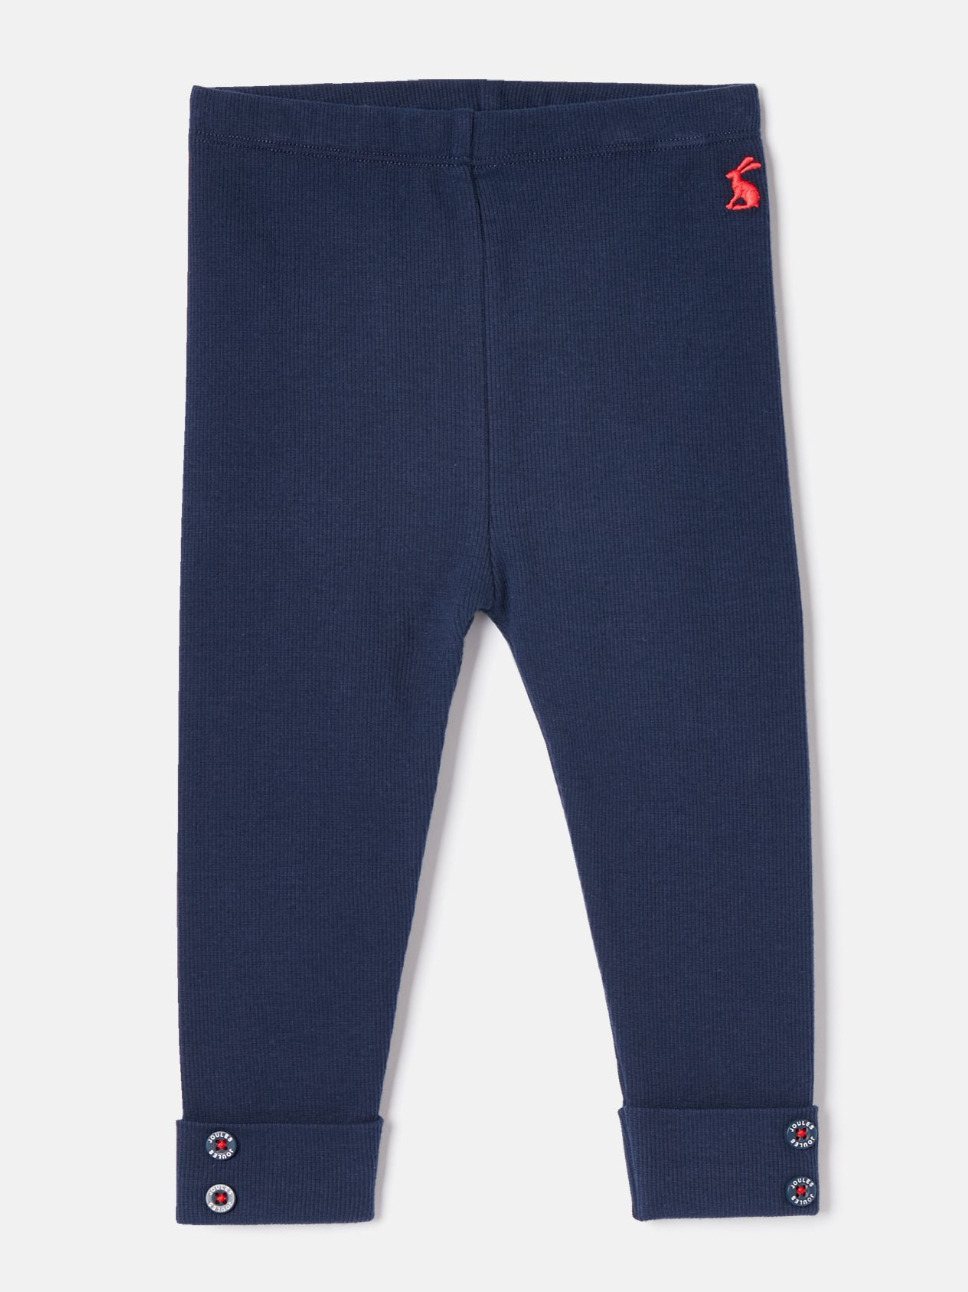 Joules Merevale Infant Organically Grown Cotton Legging  - Navy